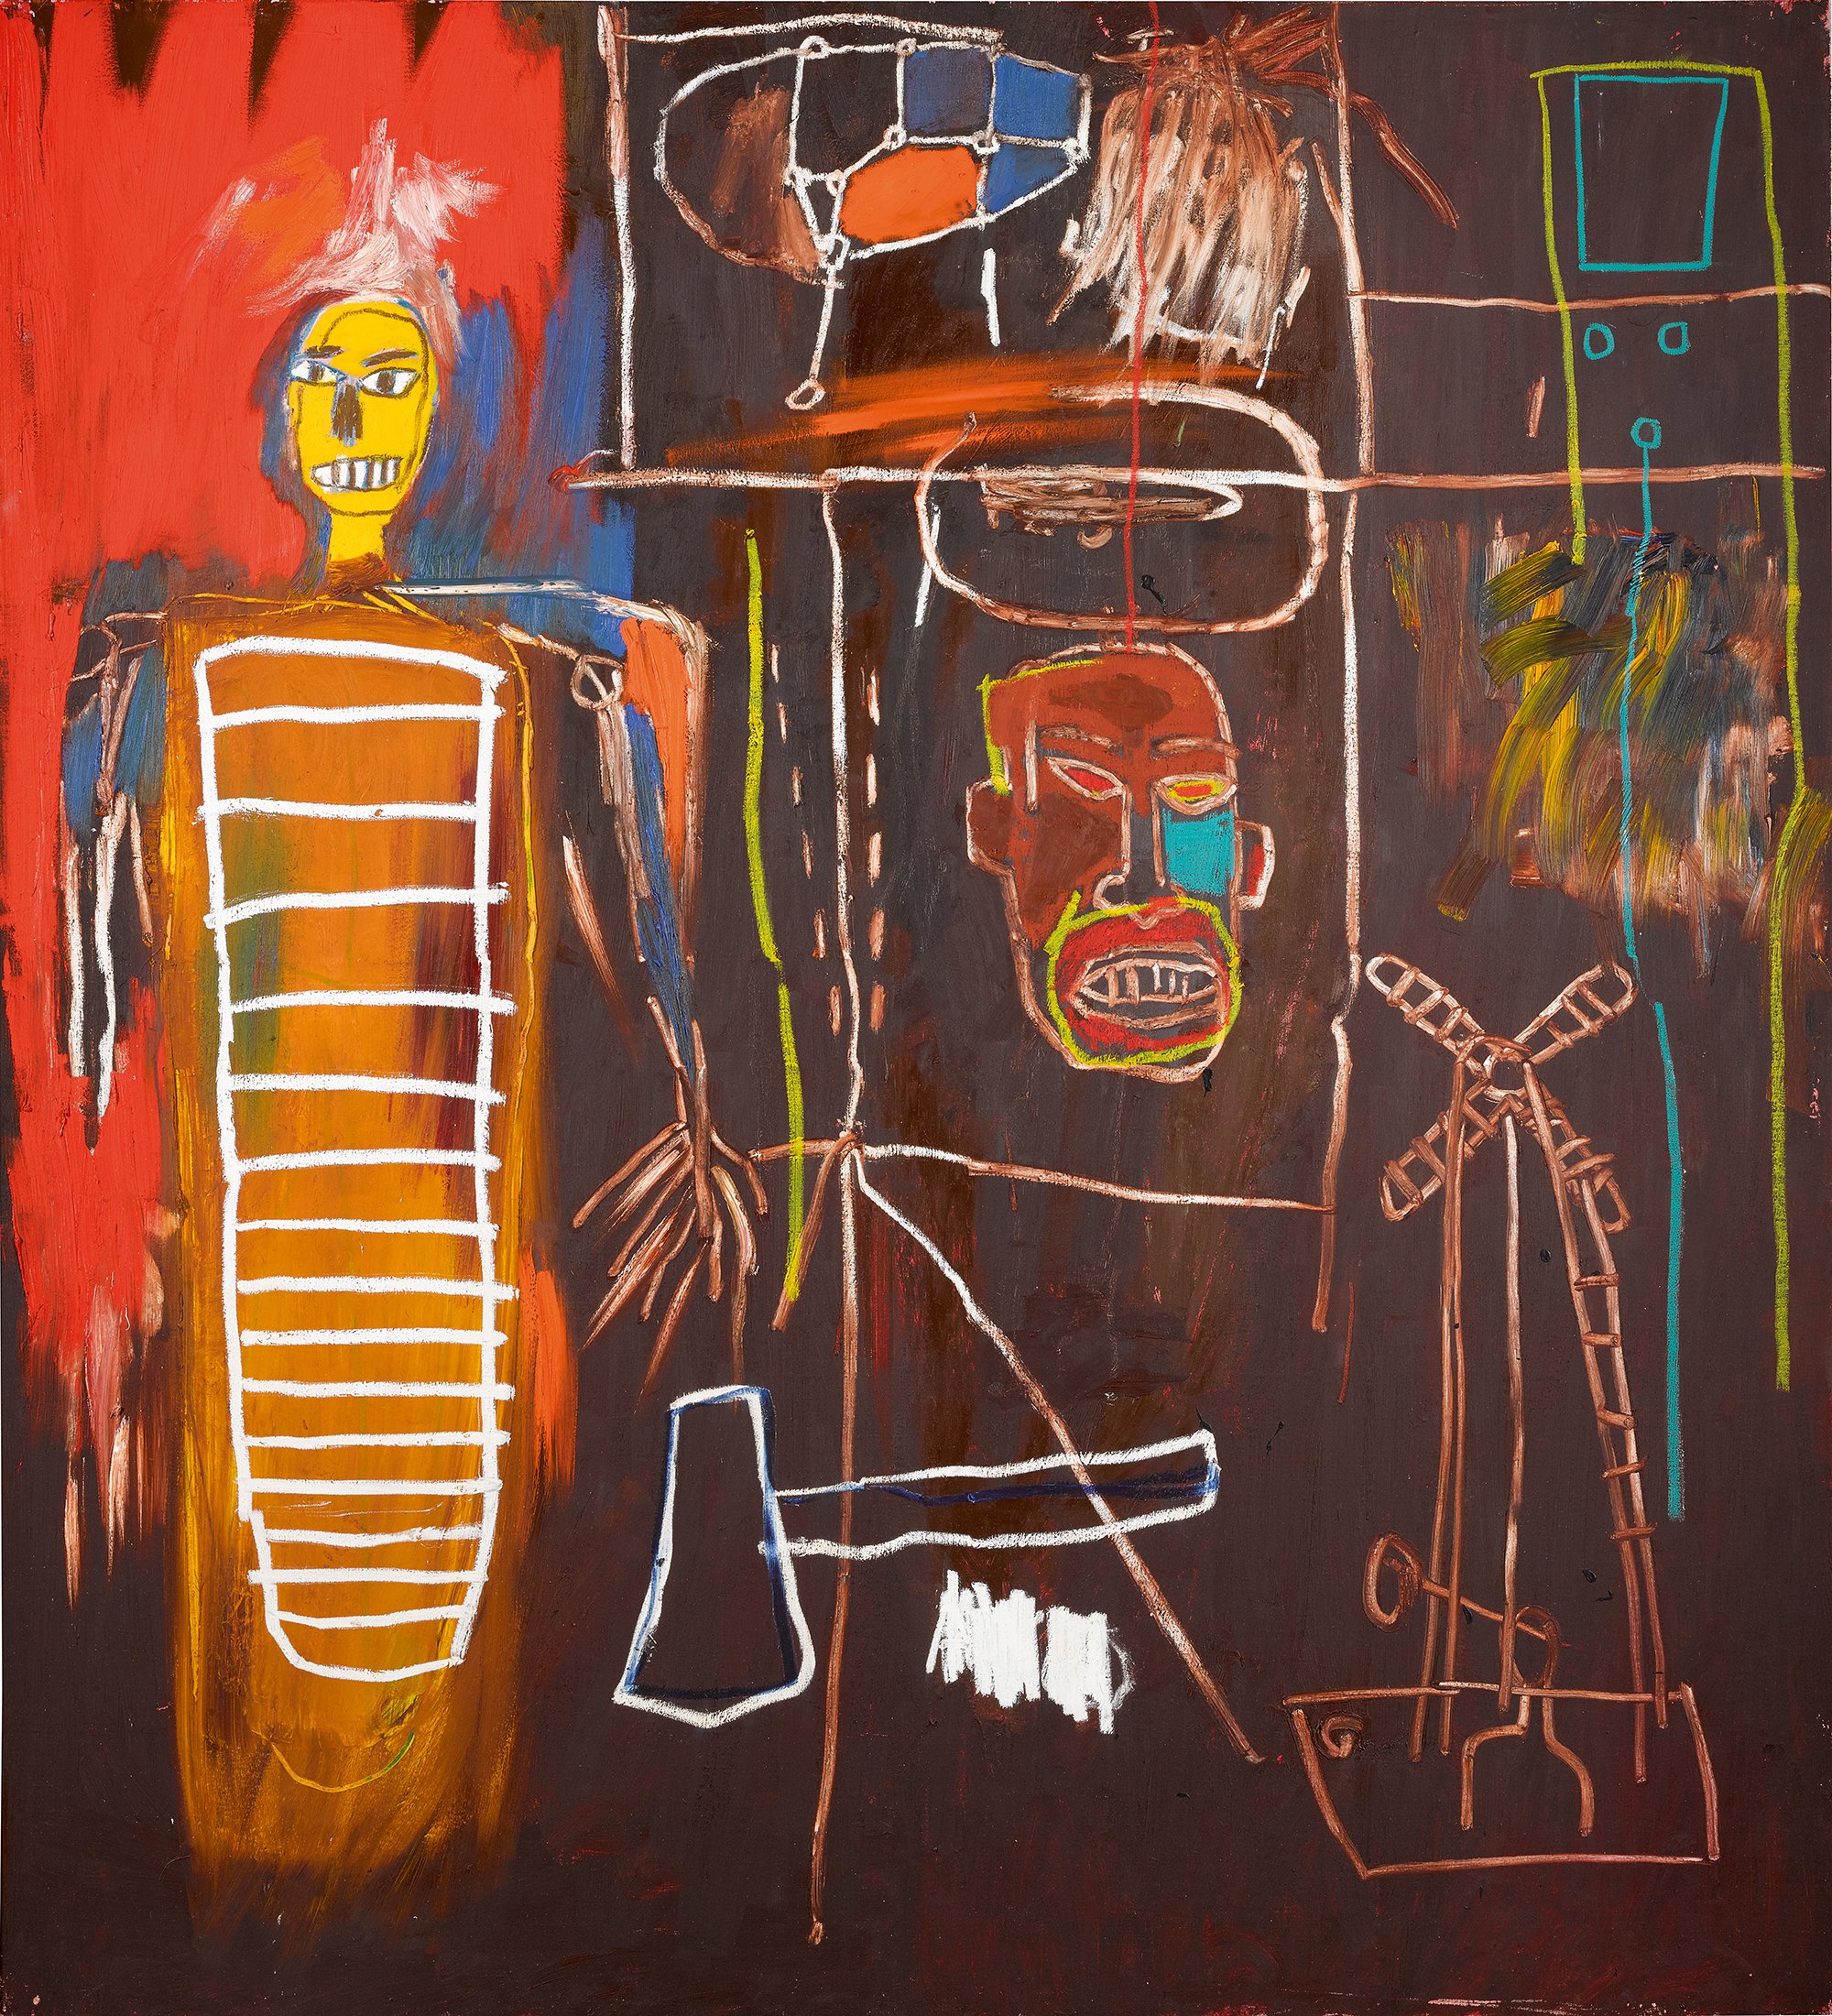 Jean-Michel Basquiat, <i>Air Power</i> (1984), from the collection of David Bowie. Courtesy of Sotheby's London.